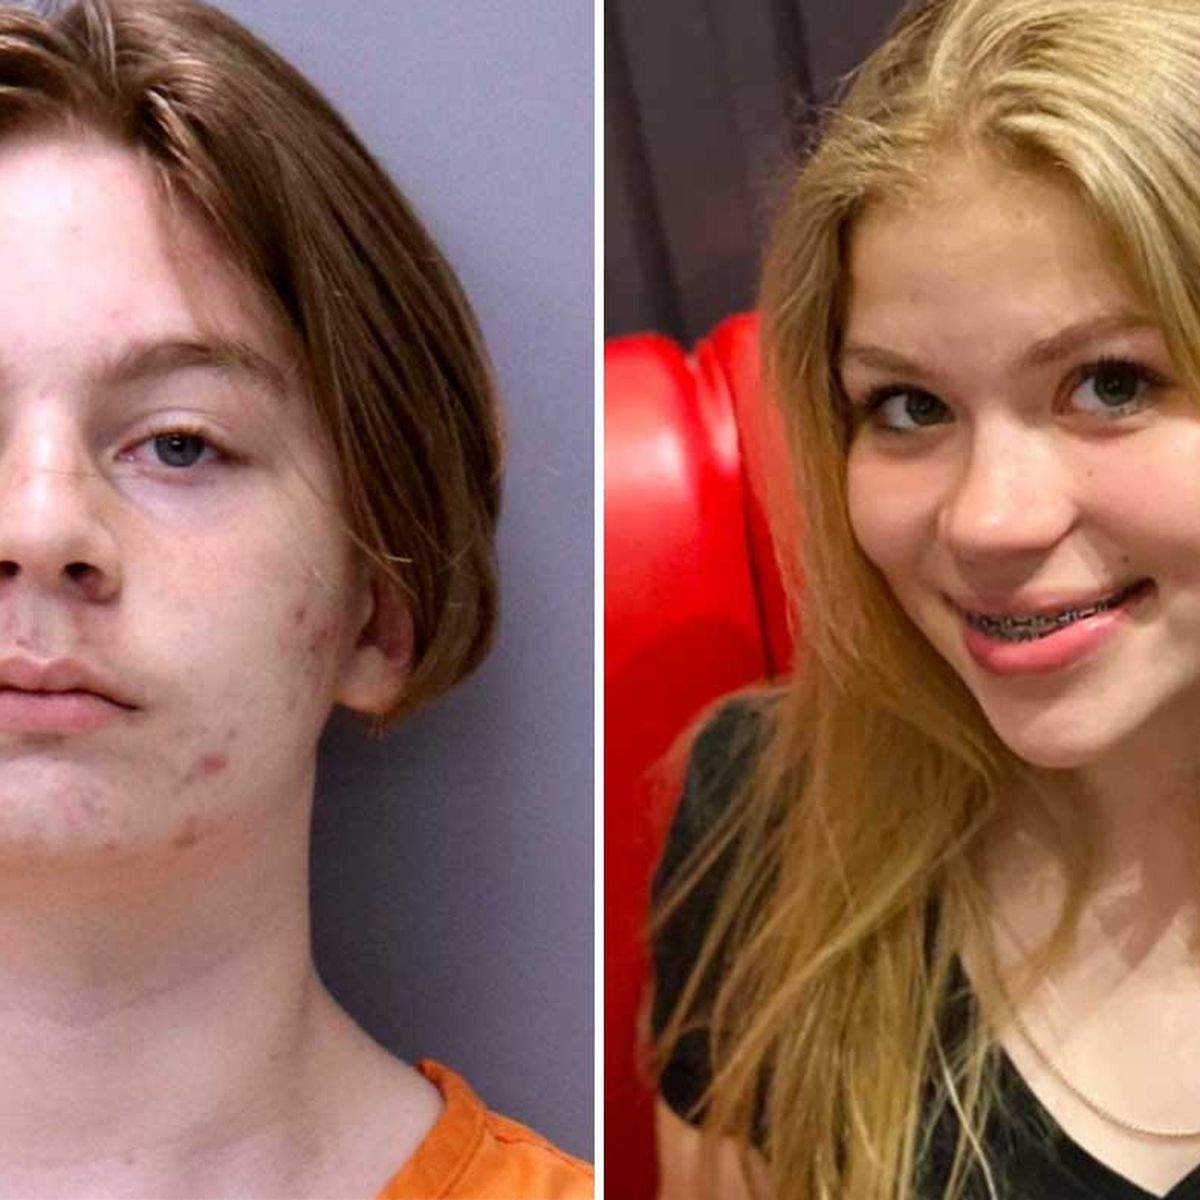 Teen Posted Sickening Snapchat After His Arrest For Cheerleader S Murder